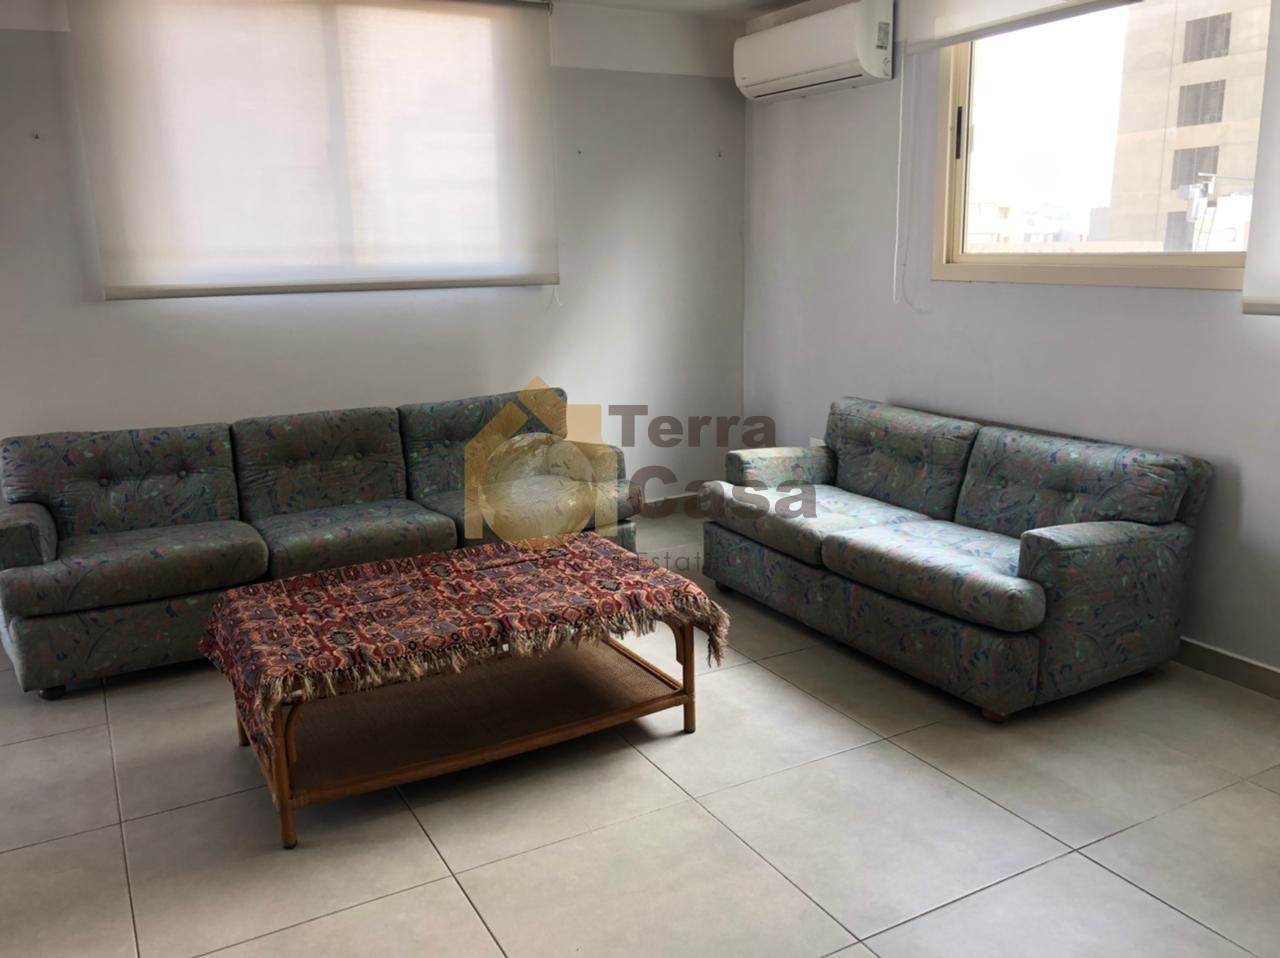 Sassine fully furnished apartment terrace 120 sqm cash payment.